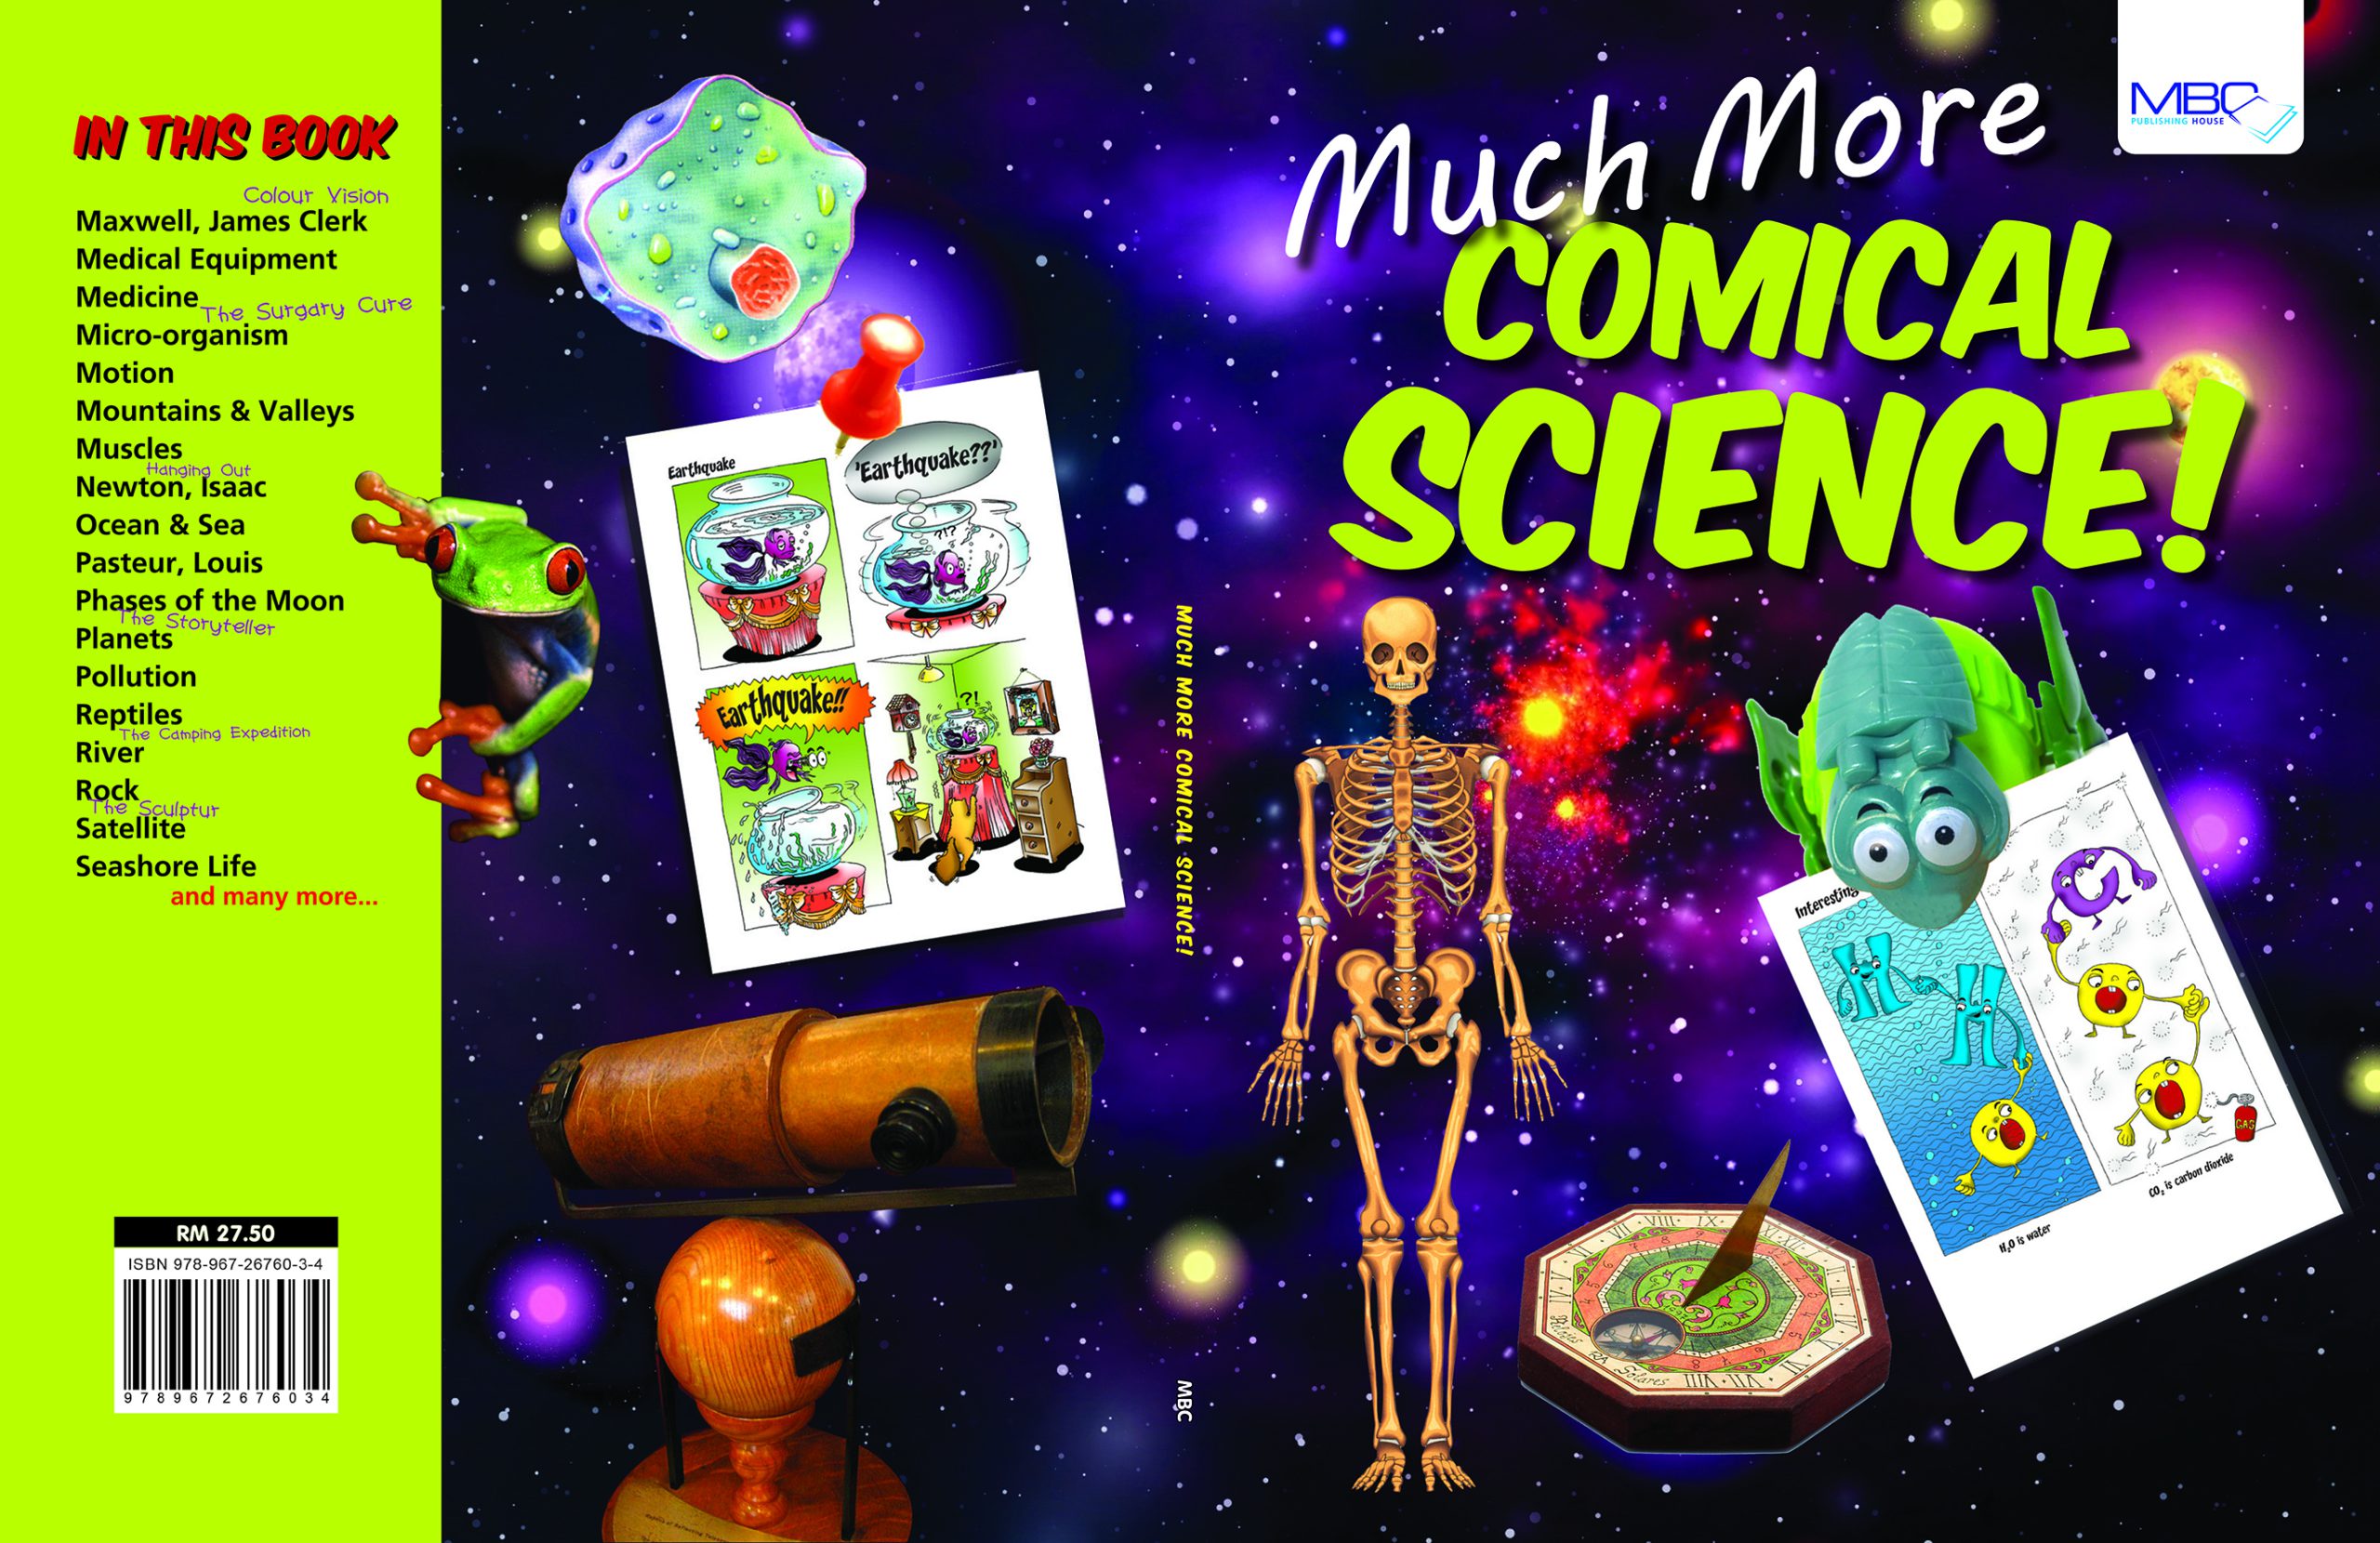 Much More Comical Science Cover Book 04